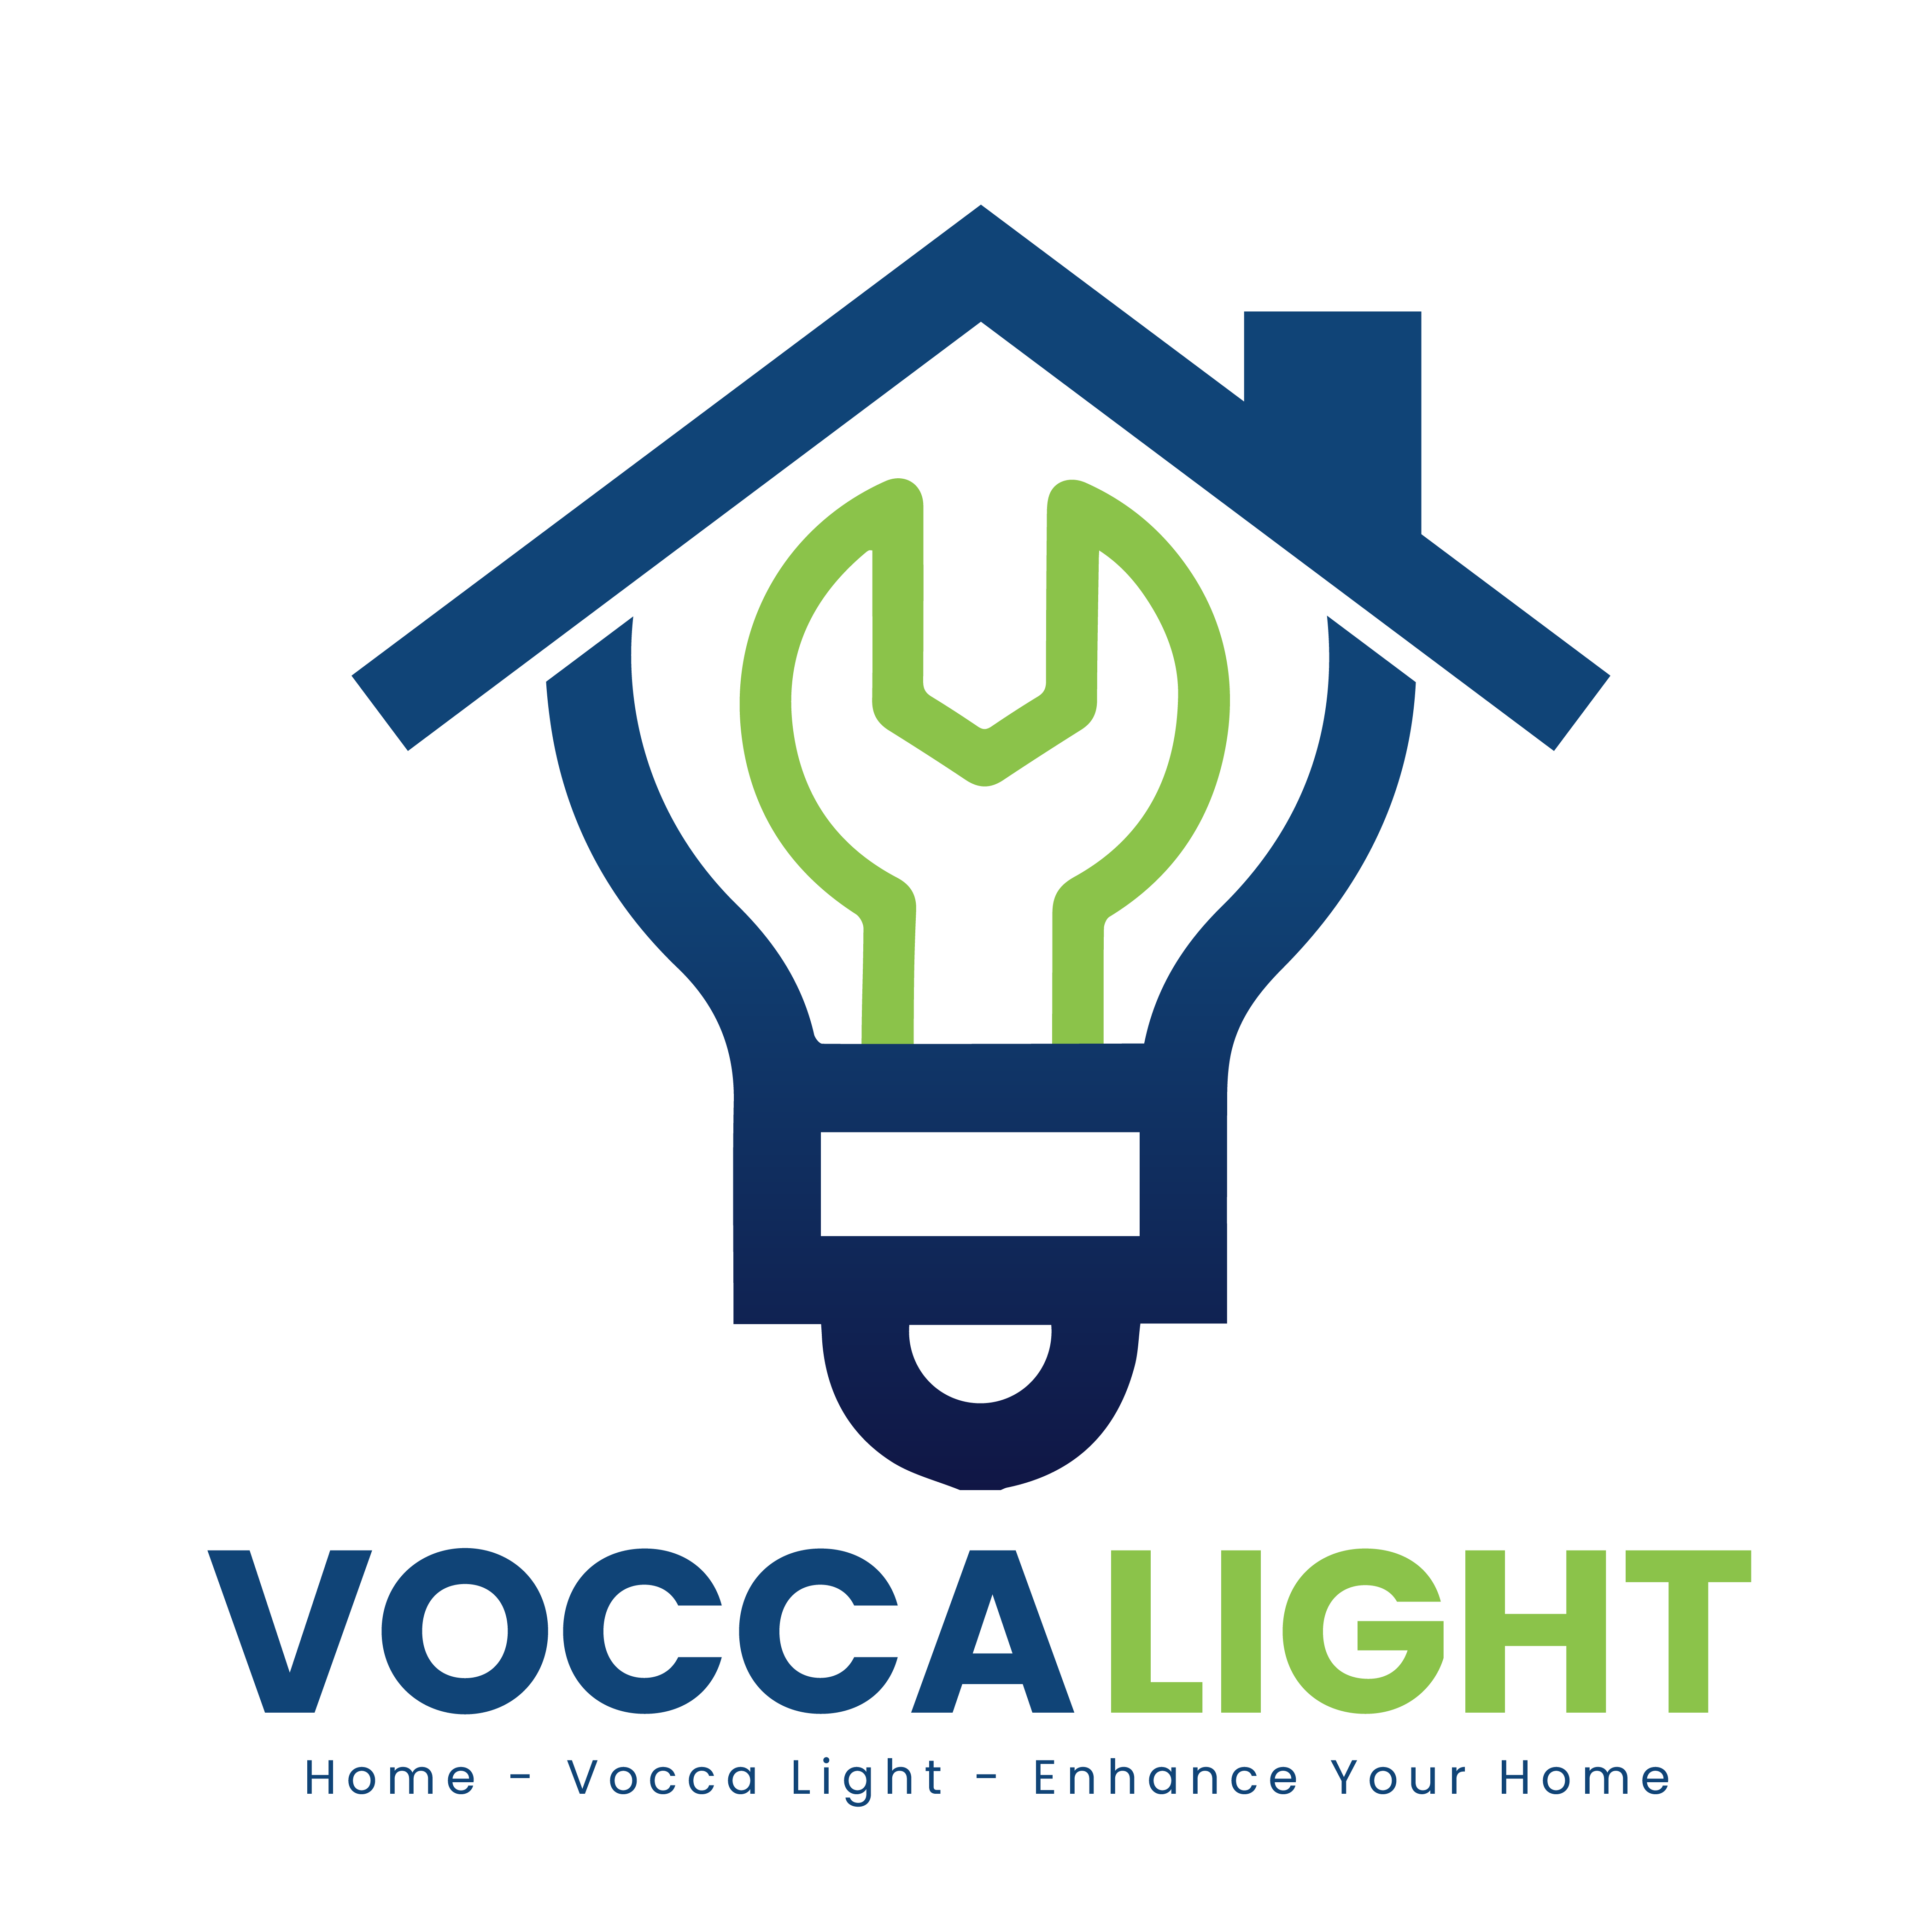 Vocca Light -Enhance Your Home: Your One-Stop Shop for Expert Home Improvement Tips, DIY Projects, and More!